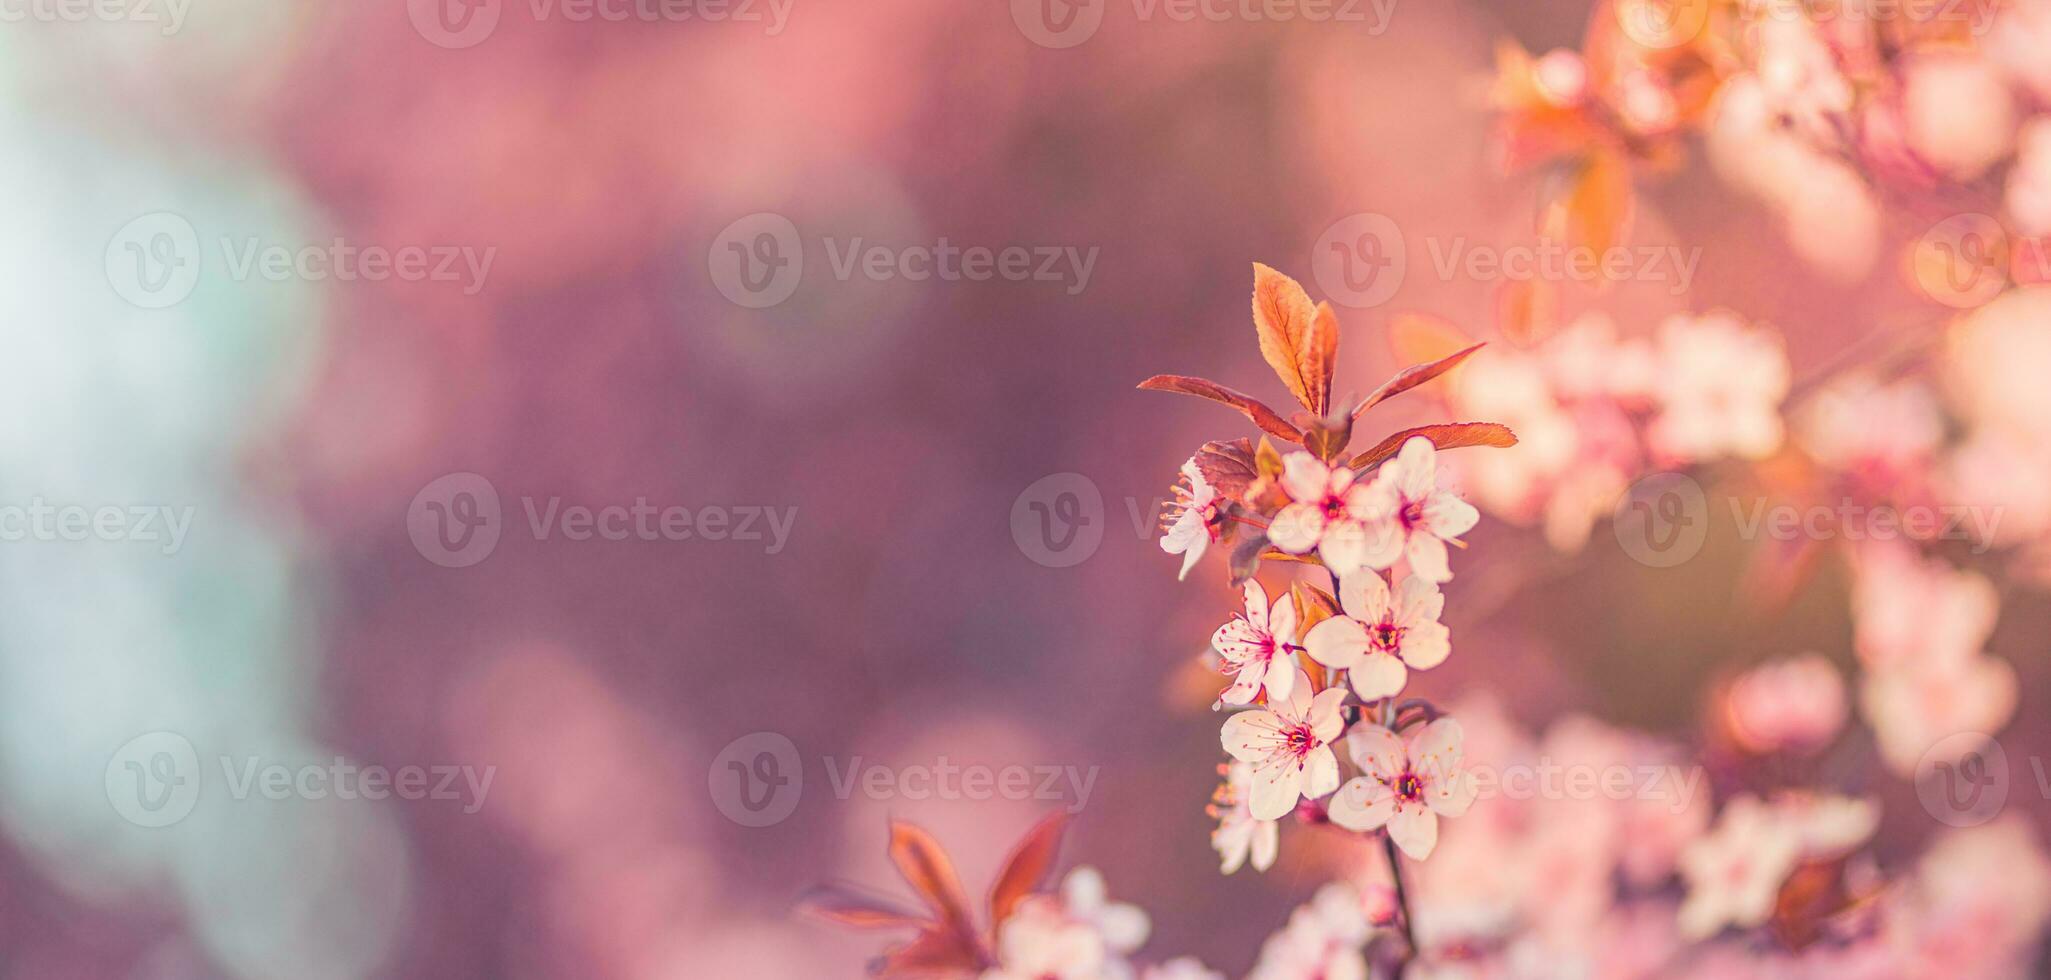 Spring background. Fresh flowers in bloom, beautiful soft colors blooming springtime tree. Peaceful artistic nature on blurred natural background. Fantastic springtime closeup photo